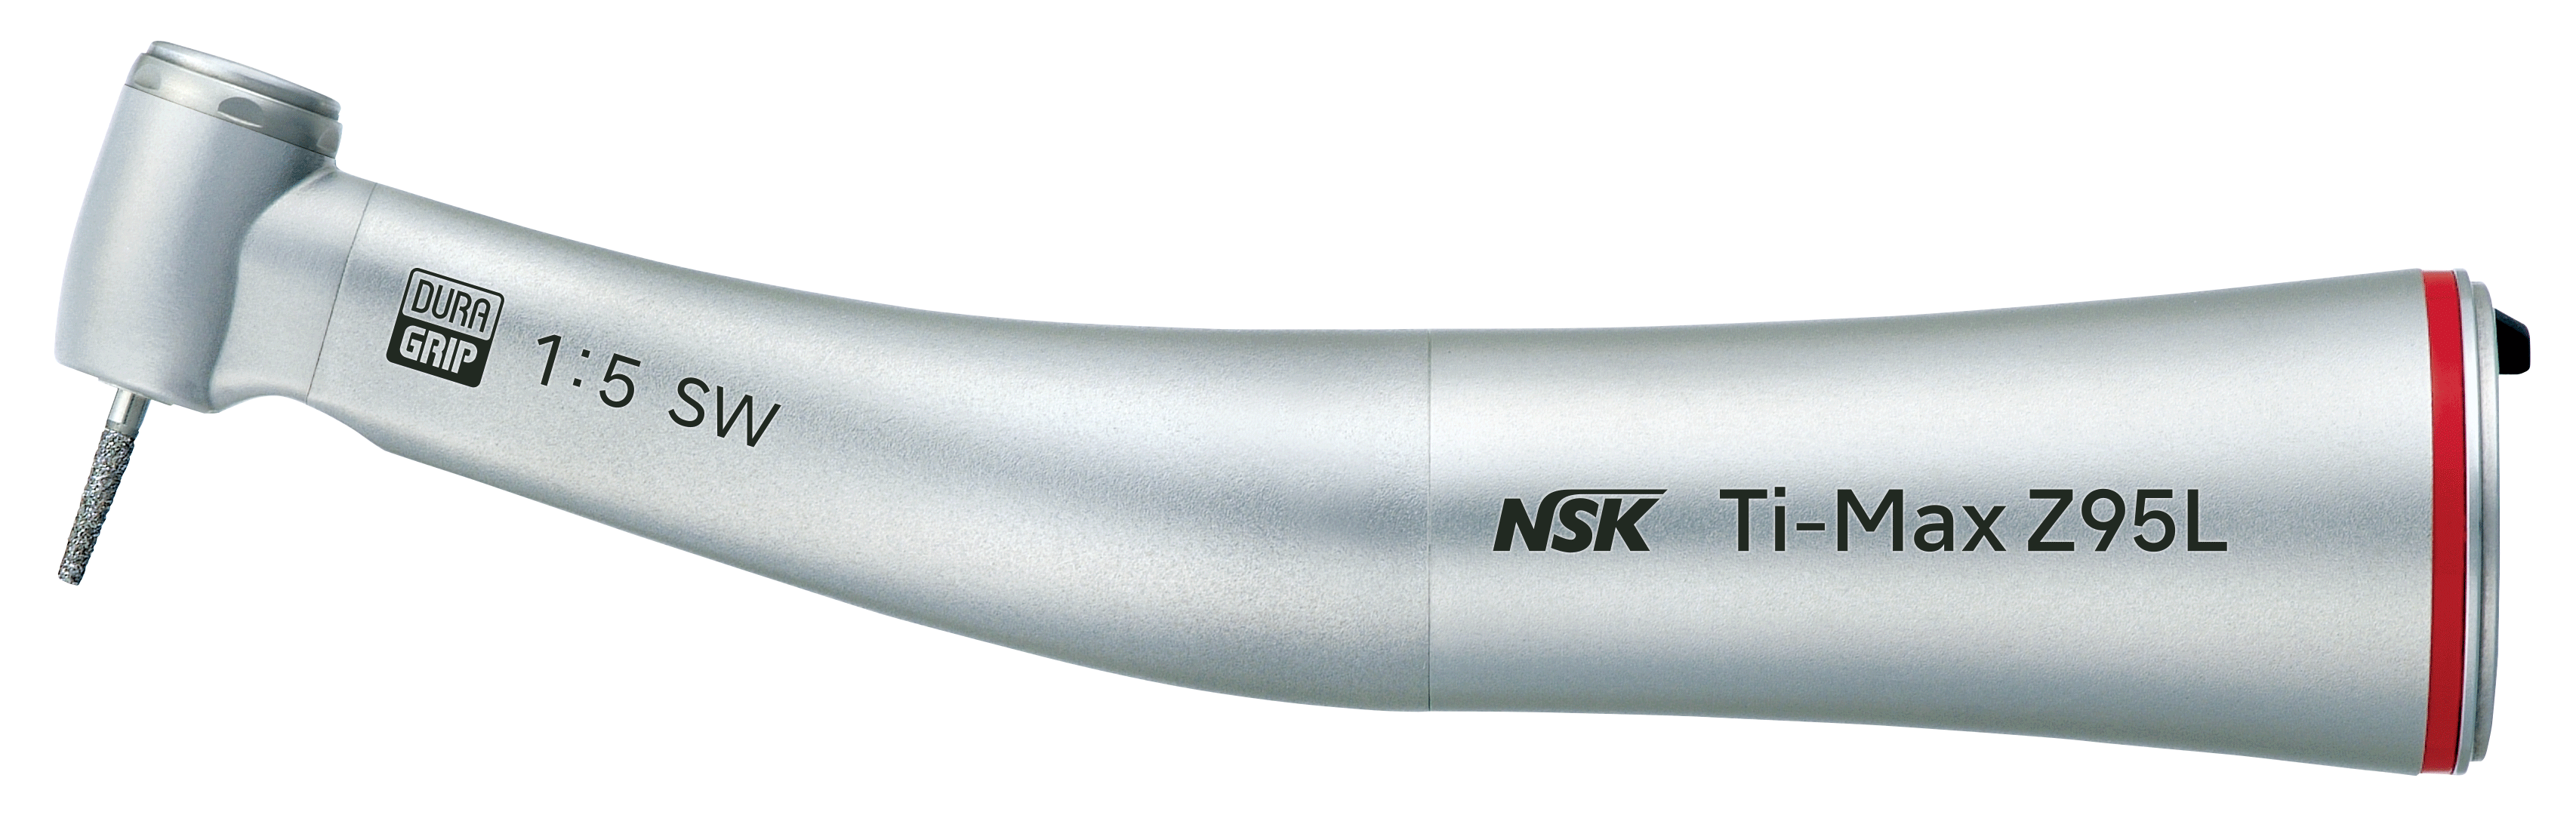 NSK introduces Valve Switch to Ti-Max handpiece